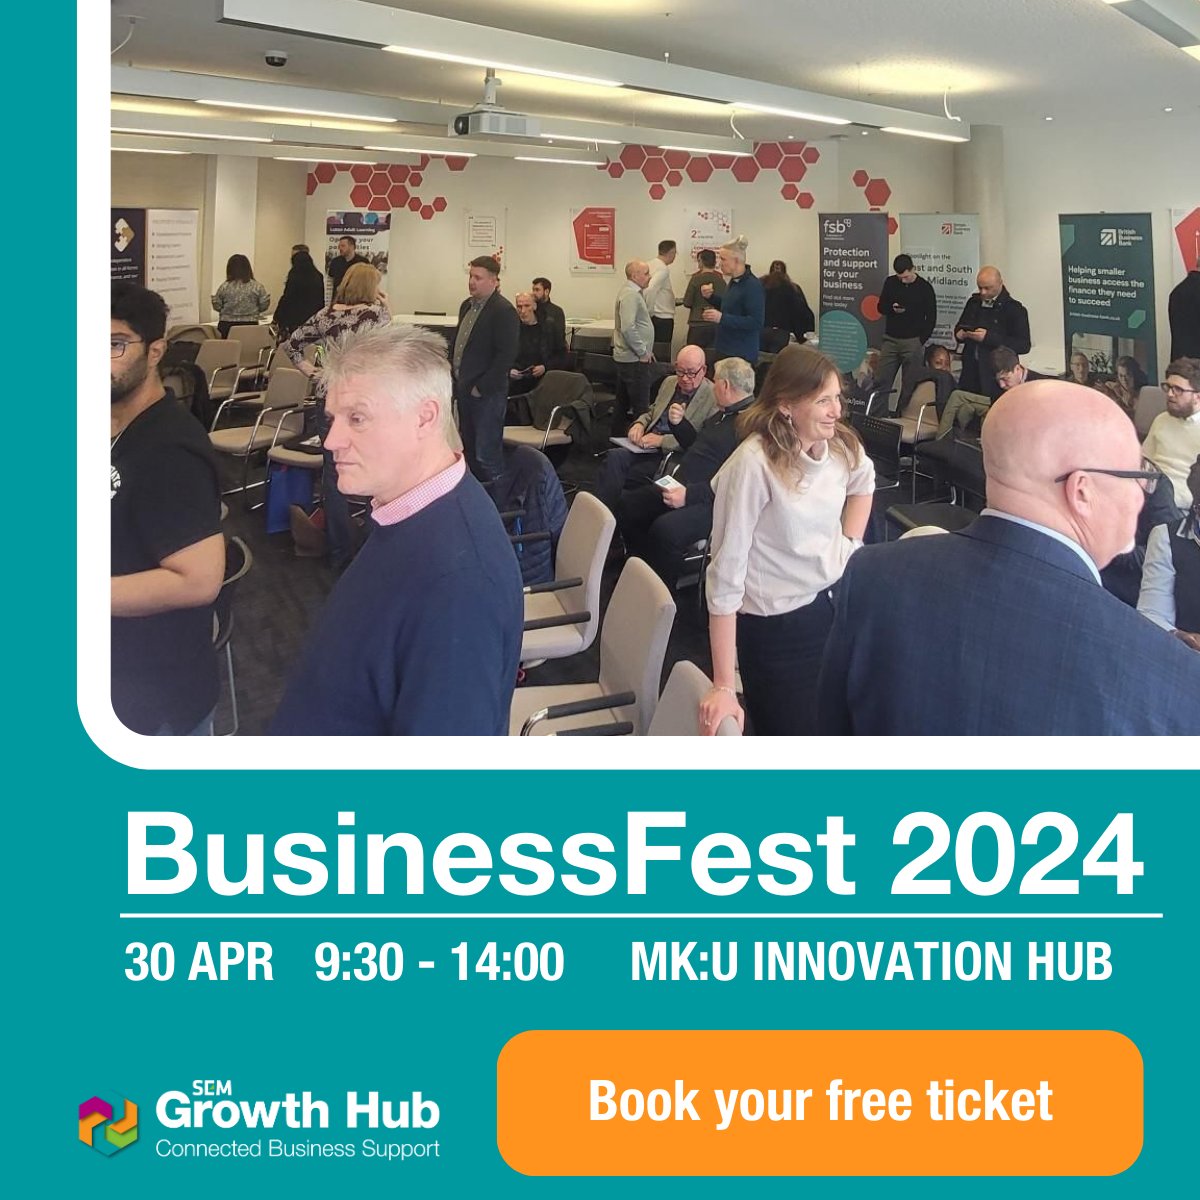 💪 Looking to strengthen your #business strategy❓ ➡️ Join @SEMLEPGrowthHub at BusinessFest to gain invaluable knowledge, network with experts & chart your pathway to business growth in #WestNorthants 📢 Book your place - lnkd.in/e6aaG_qe